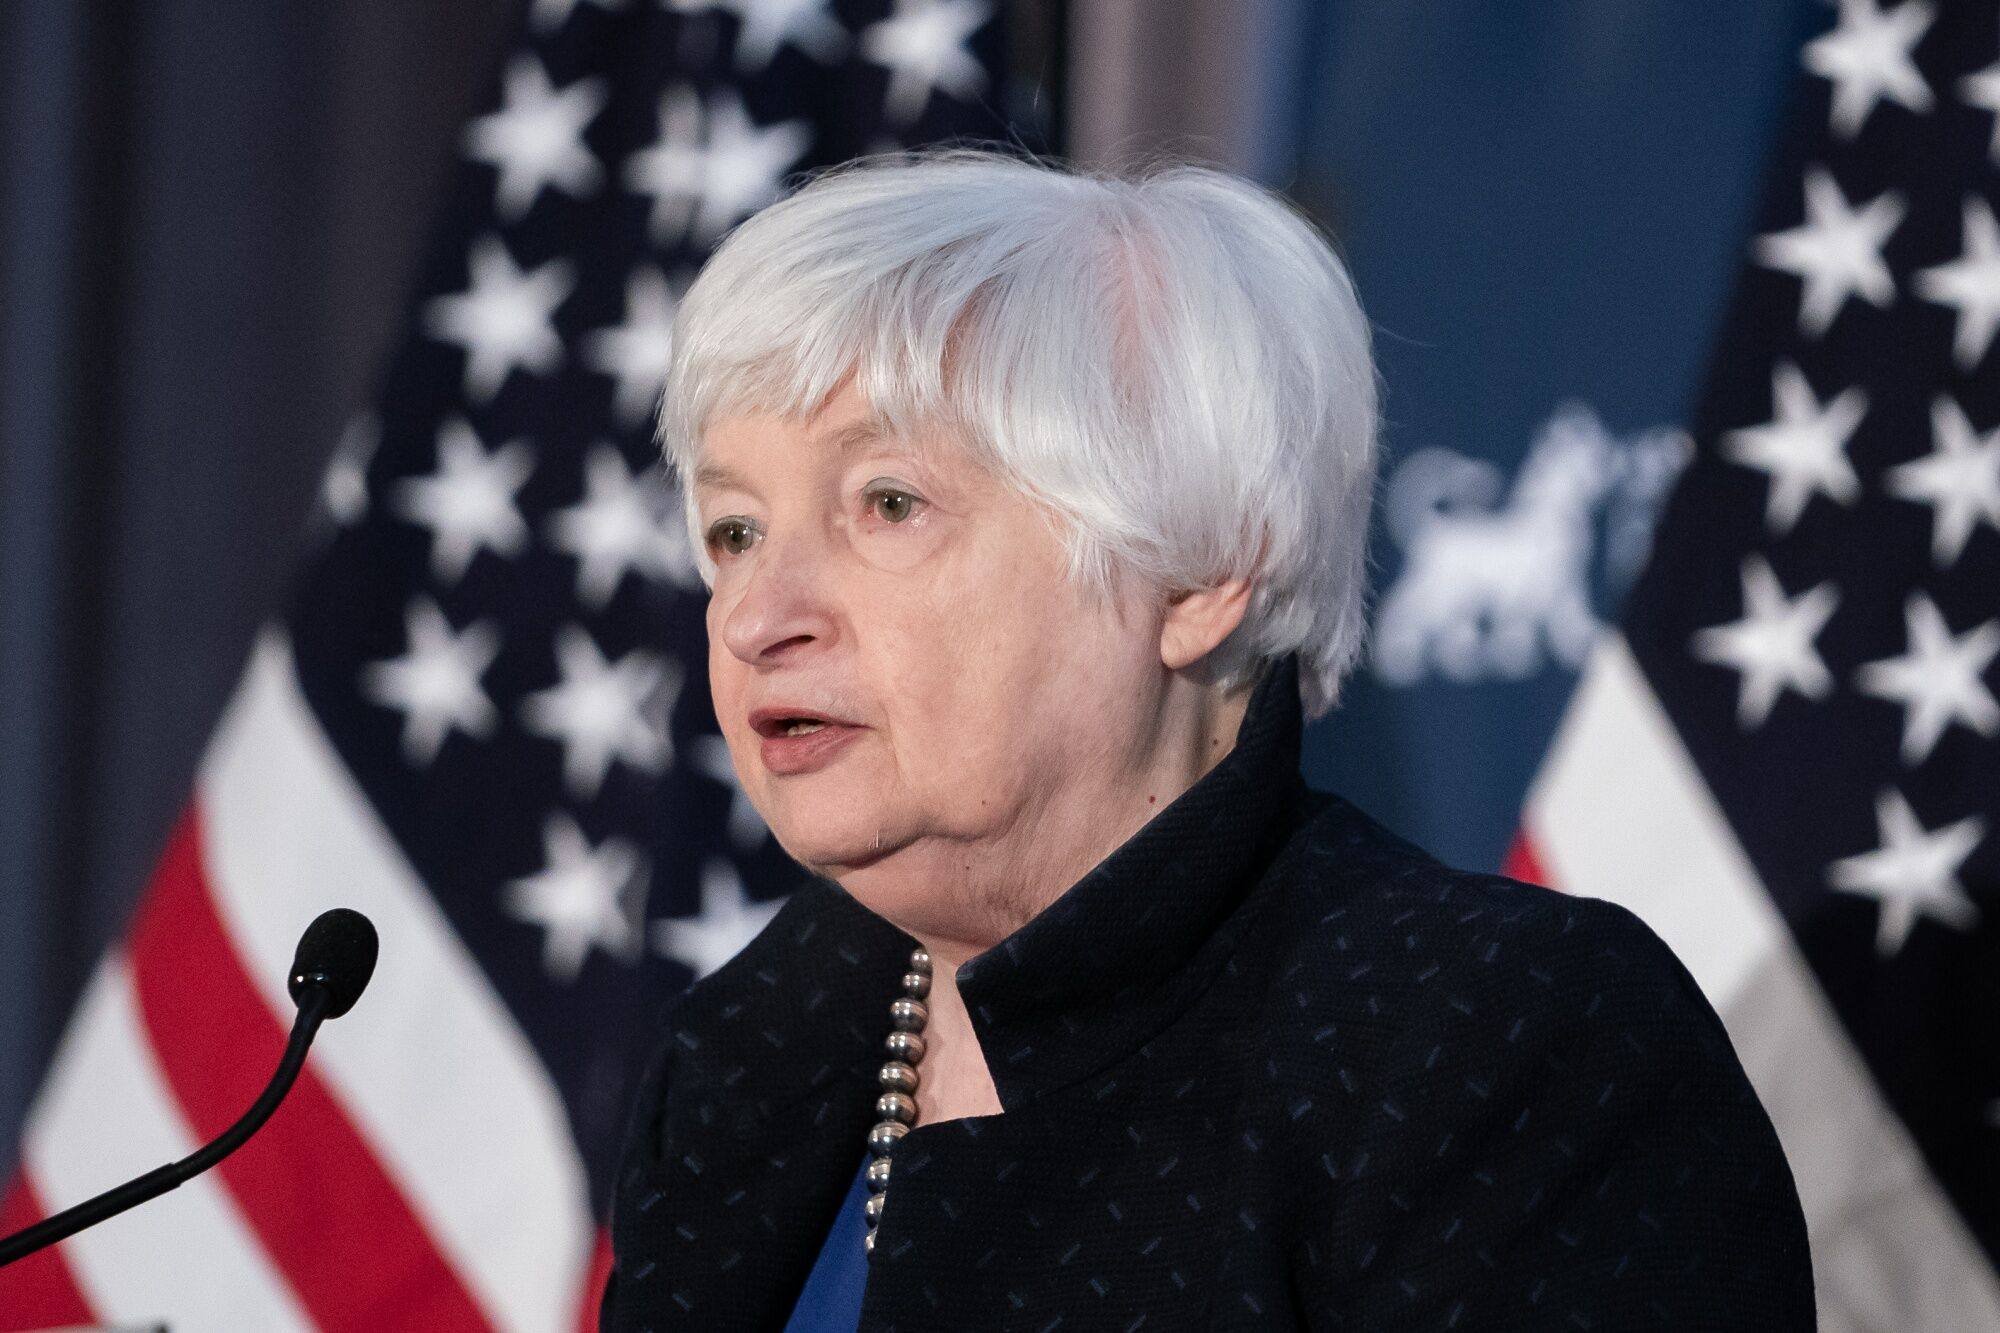 US Treasury Secretary Janet Yellen speaks during an event hosted by the Asia Society Policy Institute in Washington on Thursday. Photo: Bloomberg